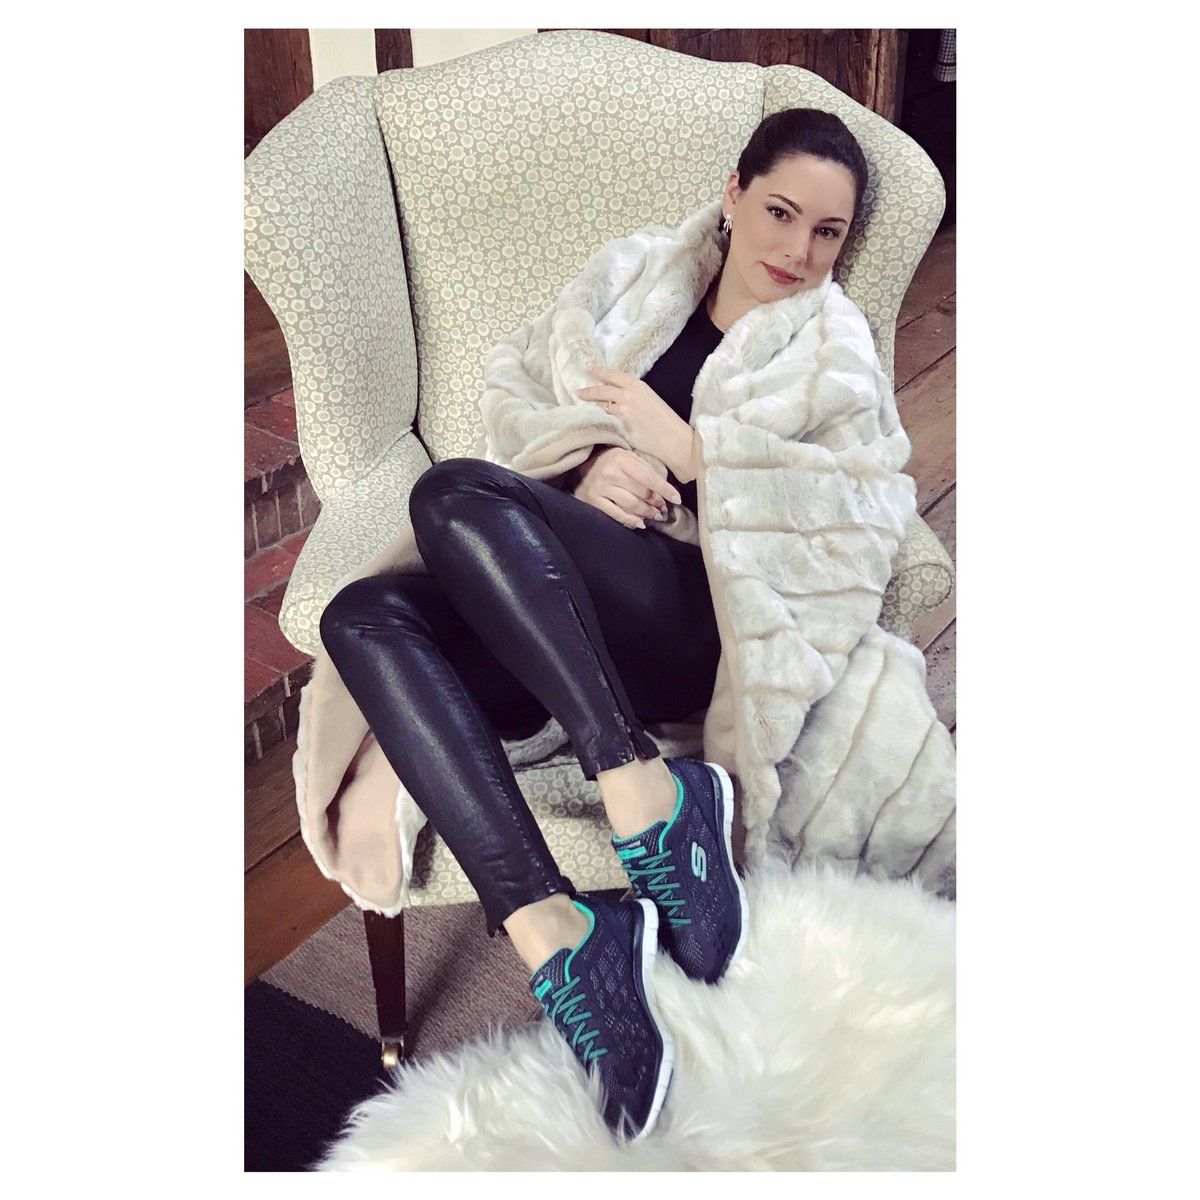 Snuggled up with my New @SKECHERSUSA shoes ????#KellylovesSkechers https://t.co/kBWGarindh